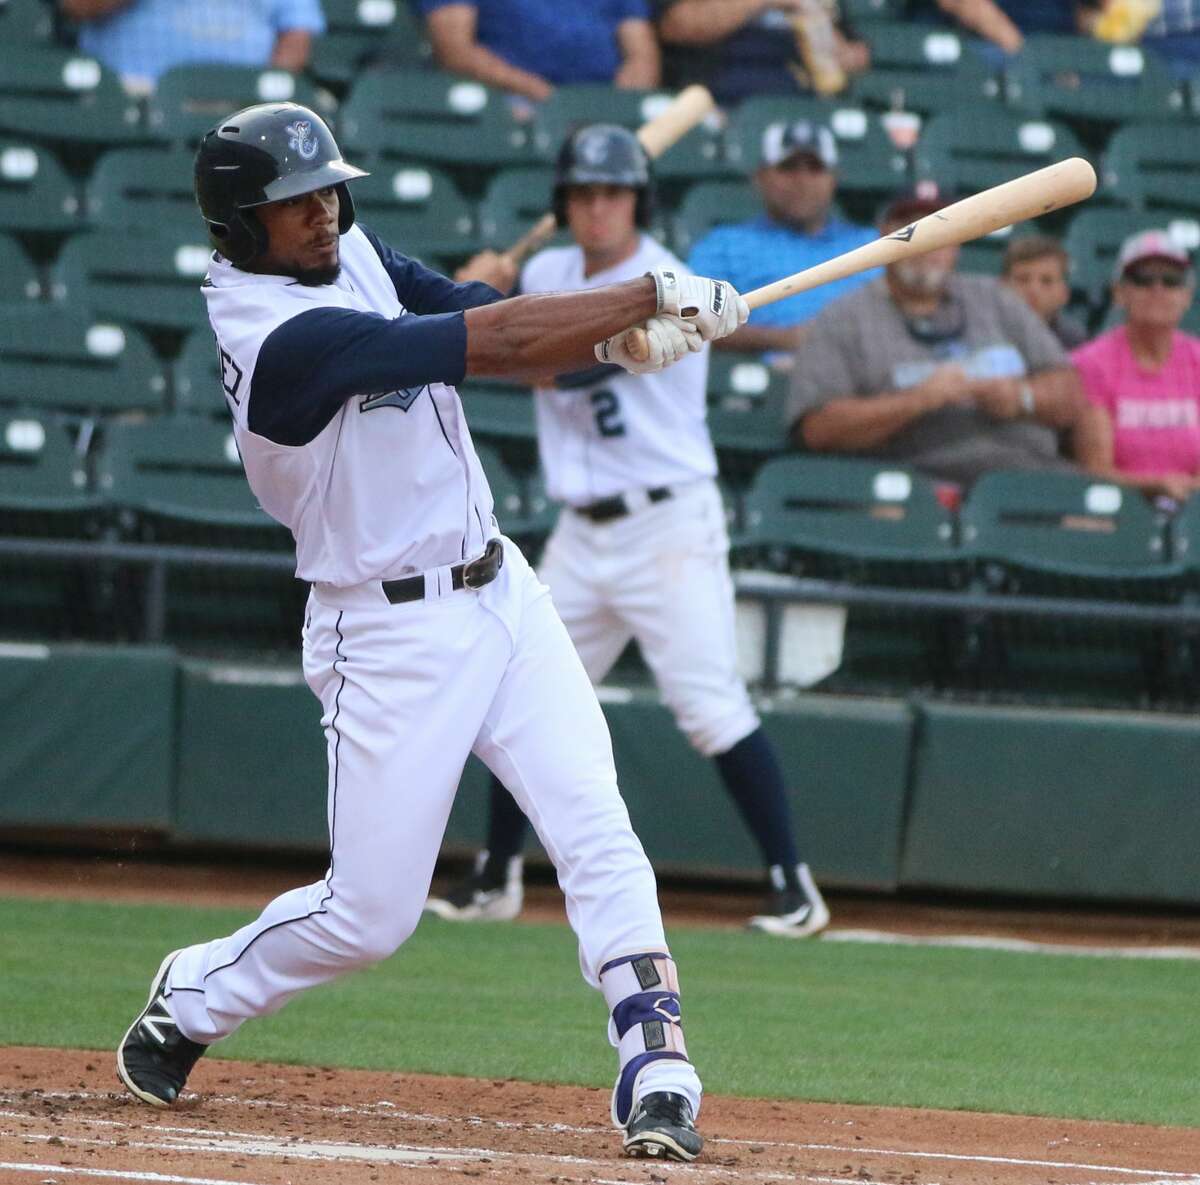 Teoscar Hernandez hit .305 in 69 games at Class AA Corpus Christi with 6 home runs and 30 RBIs with an OPS of .821 before being promoted.